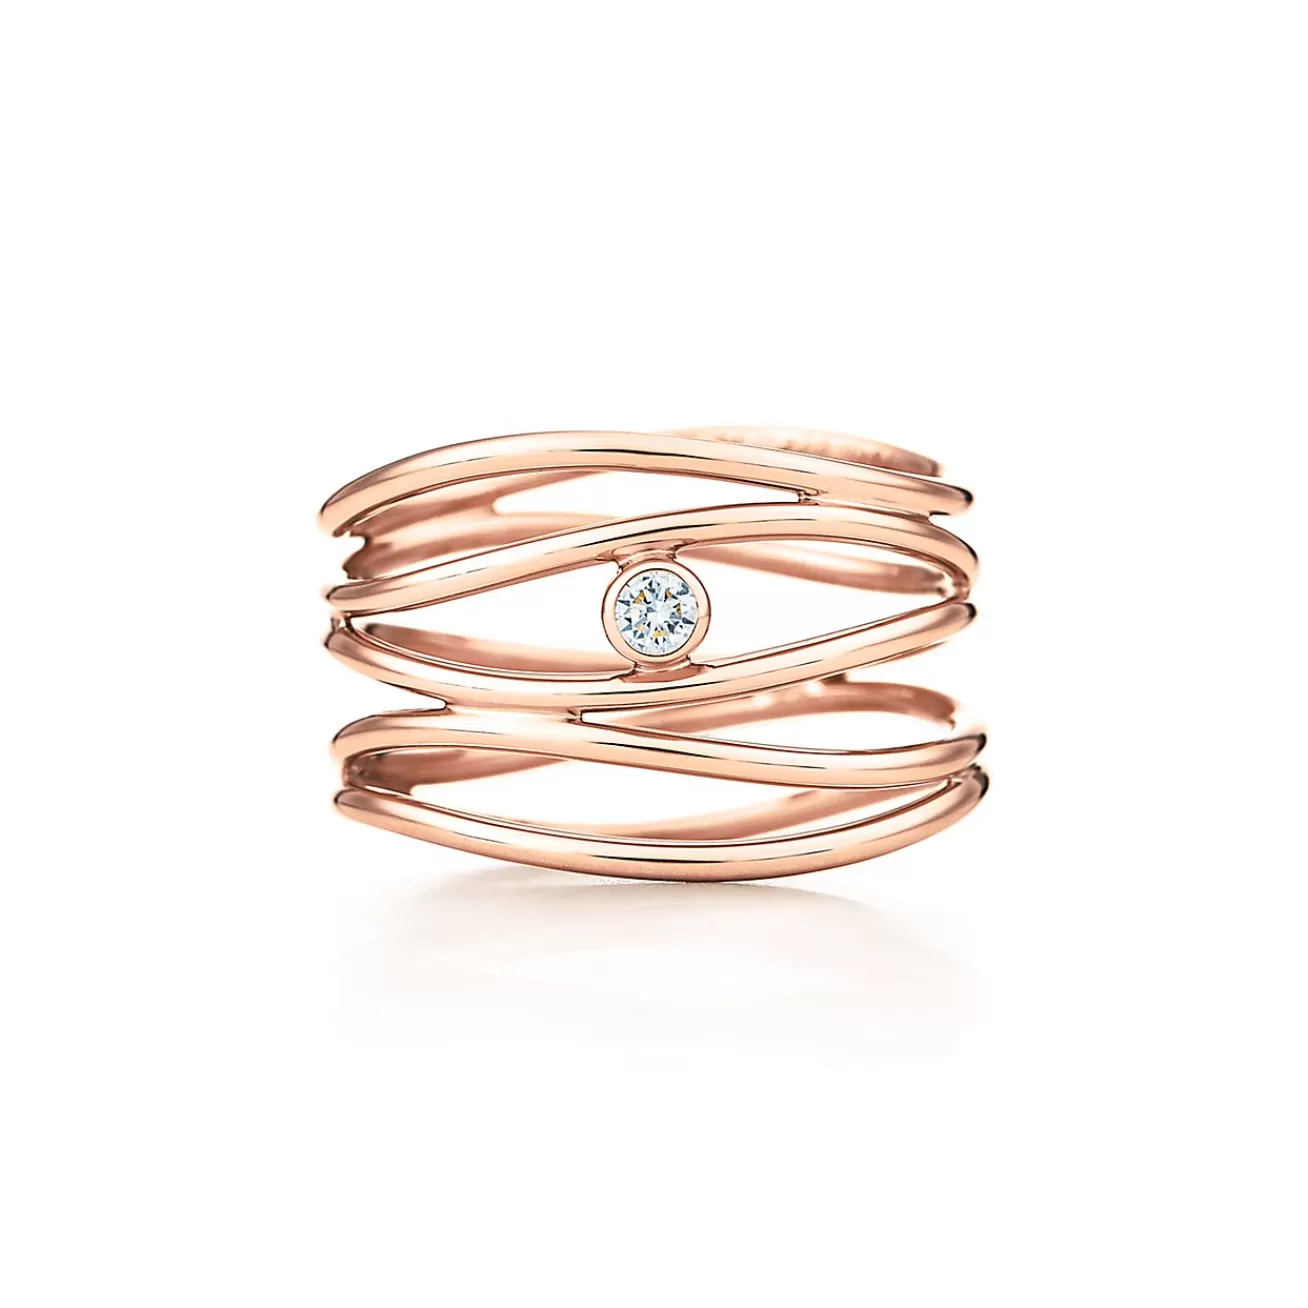 Tiffany & Co. Elsa Peretti® Wave five-row diamond ring in 18k rose gold. | ^ Rings | Rose Gold Jewelry